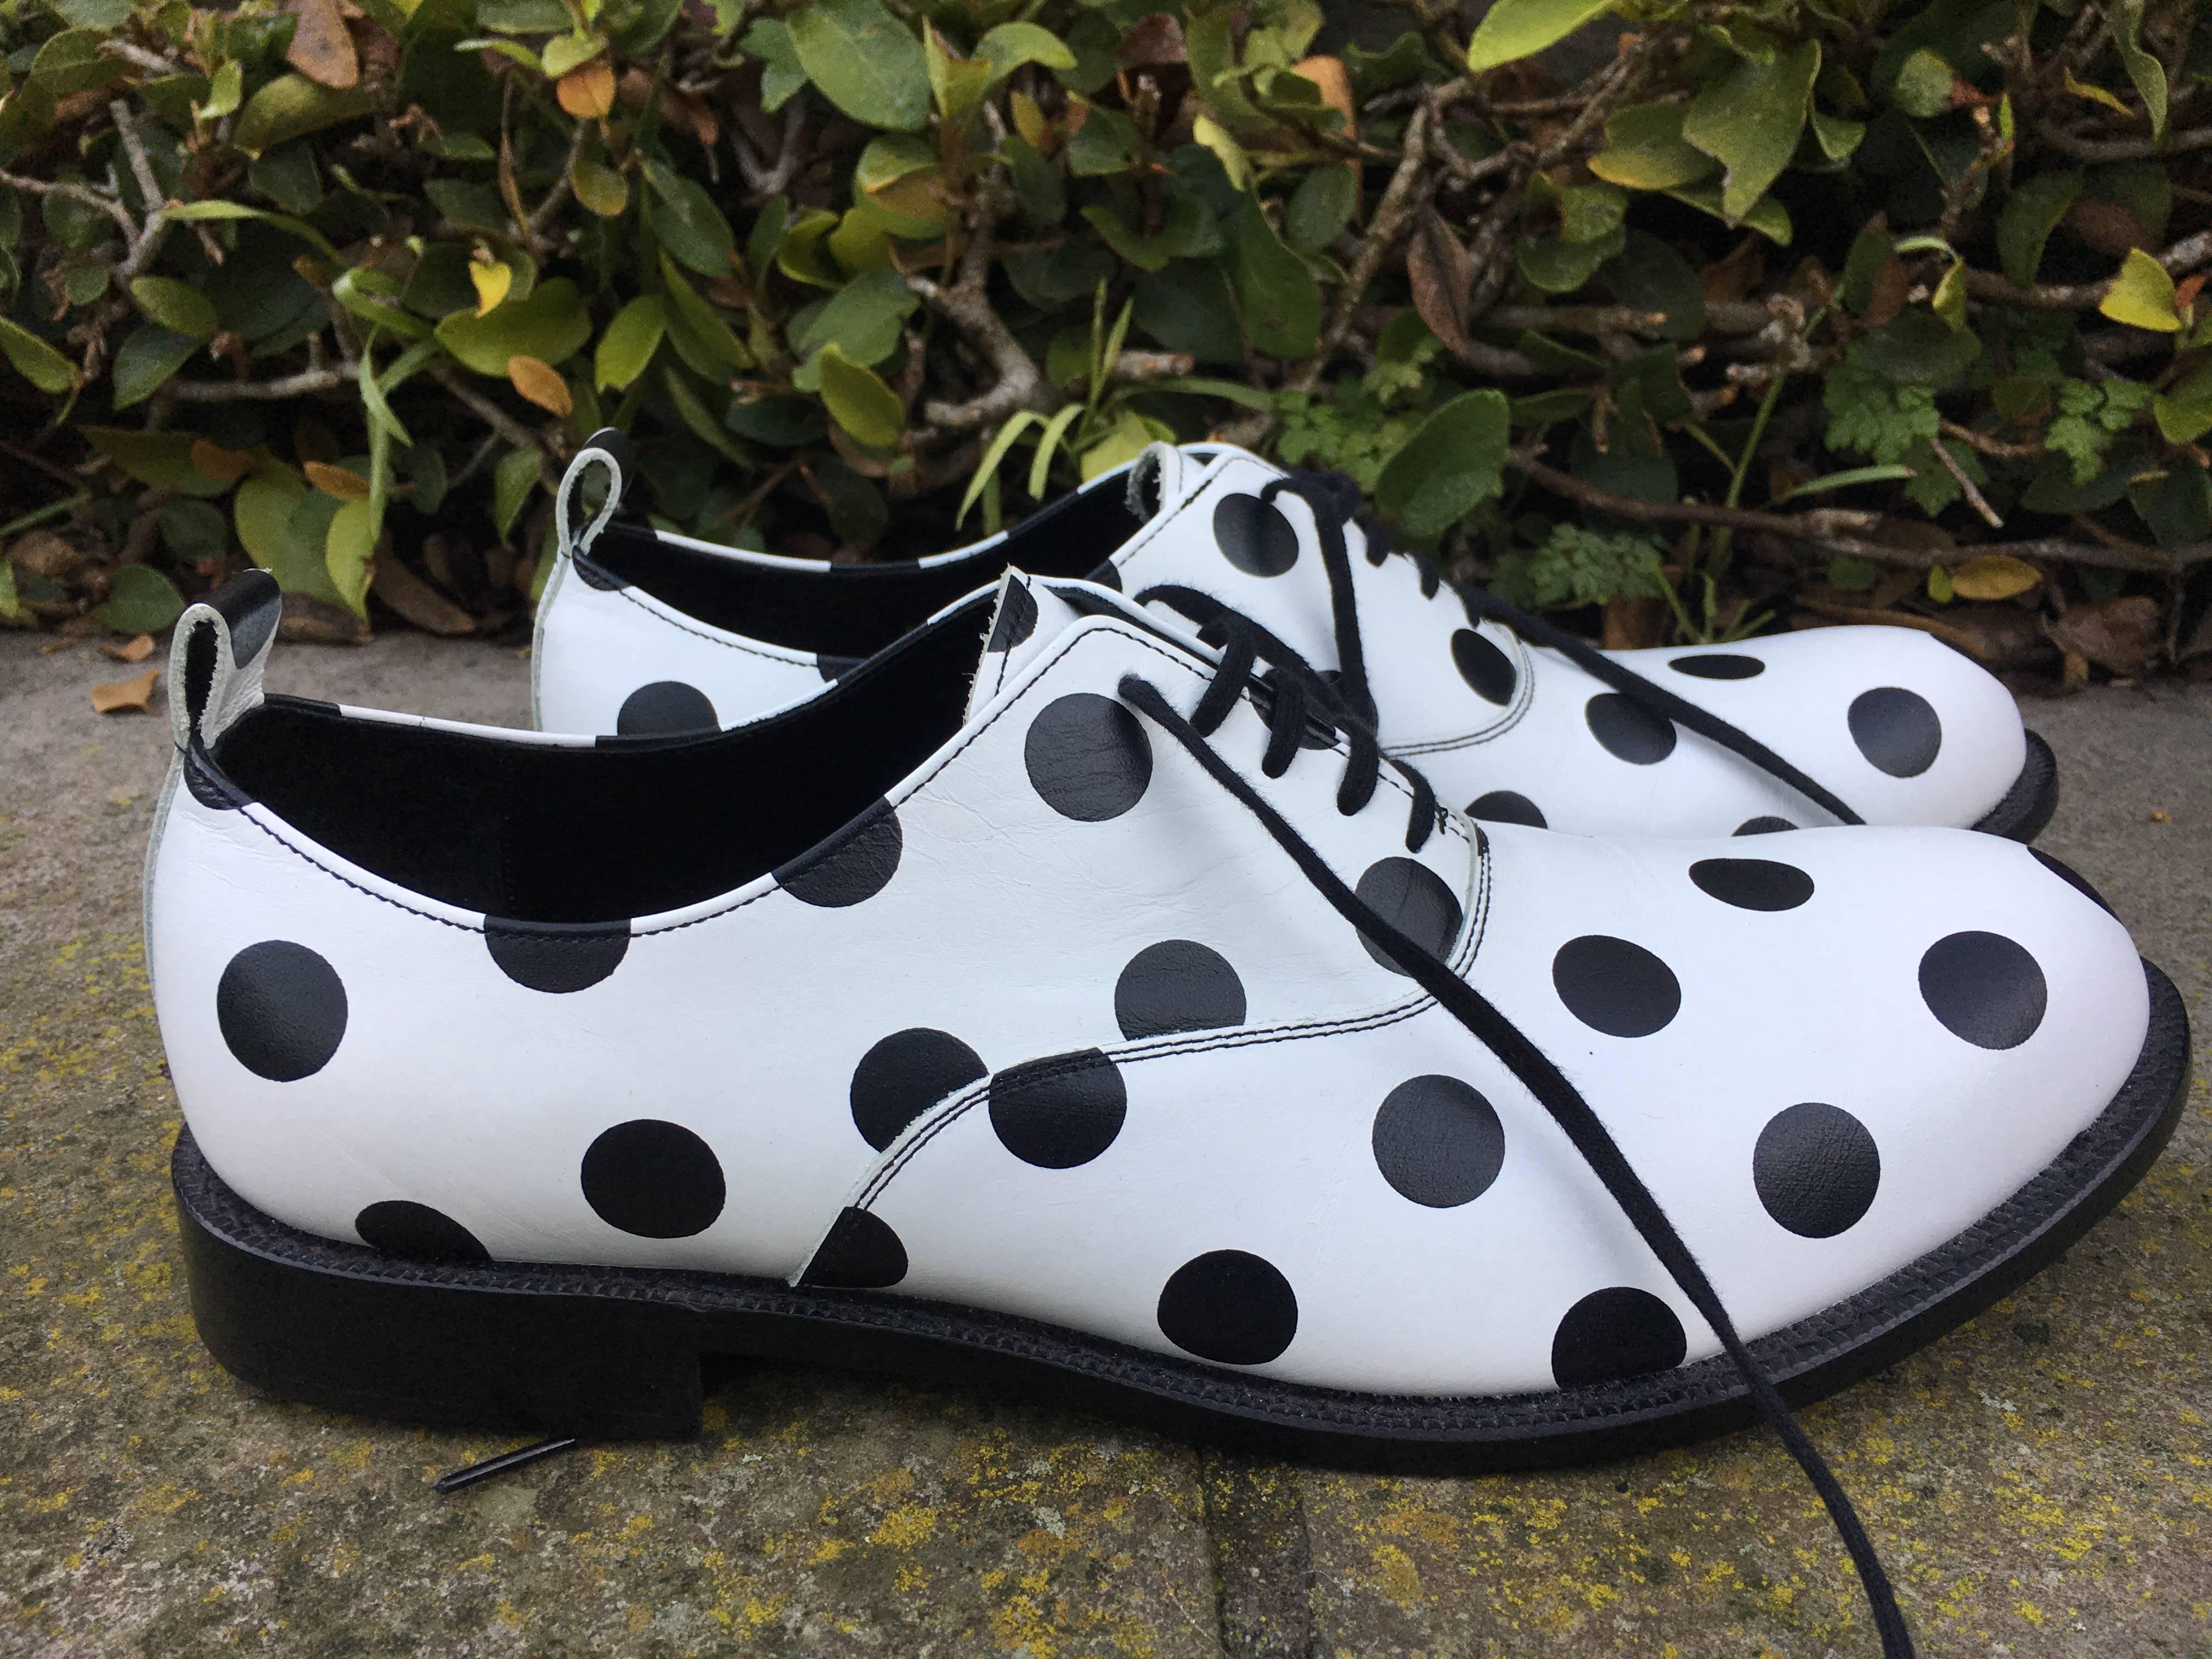 Wonderful white lace up brogues with black polka dots from Comme des Garcons Spring 2016.
Marked size 27 Japanese , these fit US size 9 1/2-10
New with out box